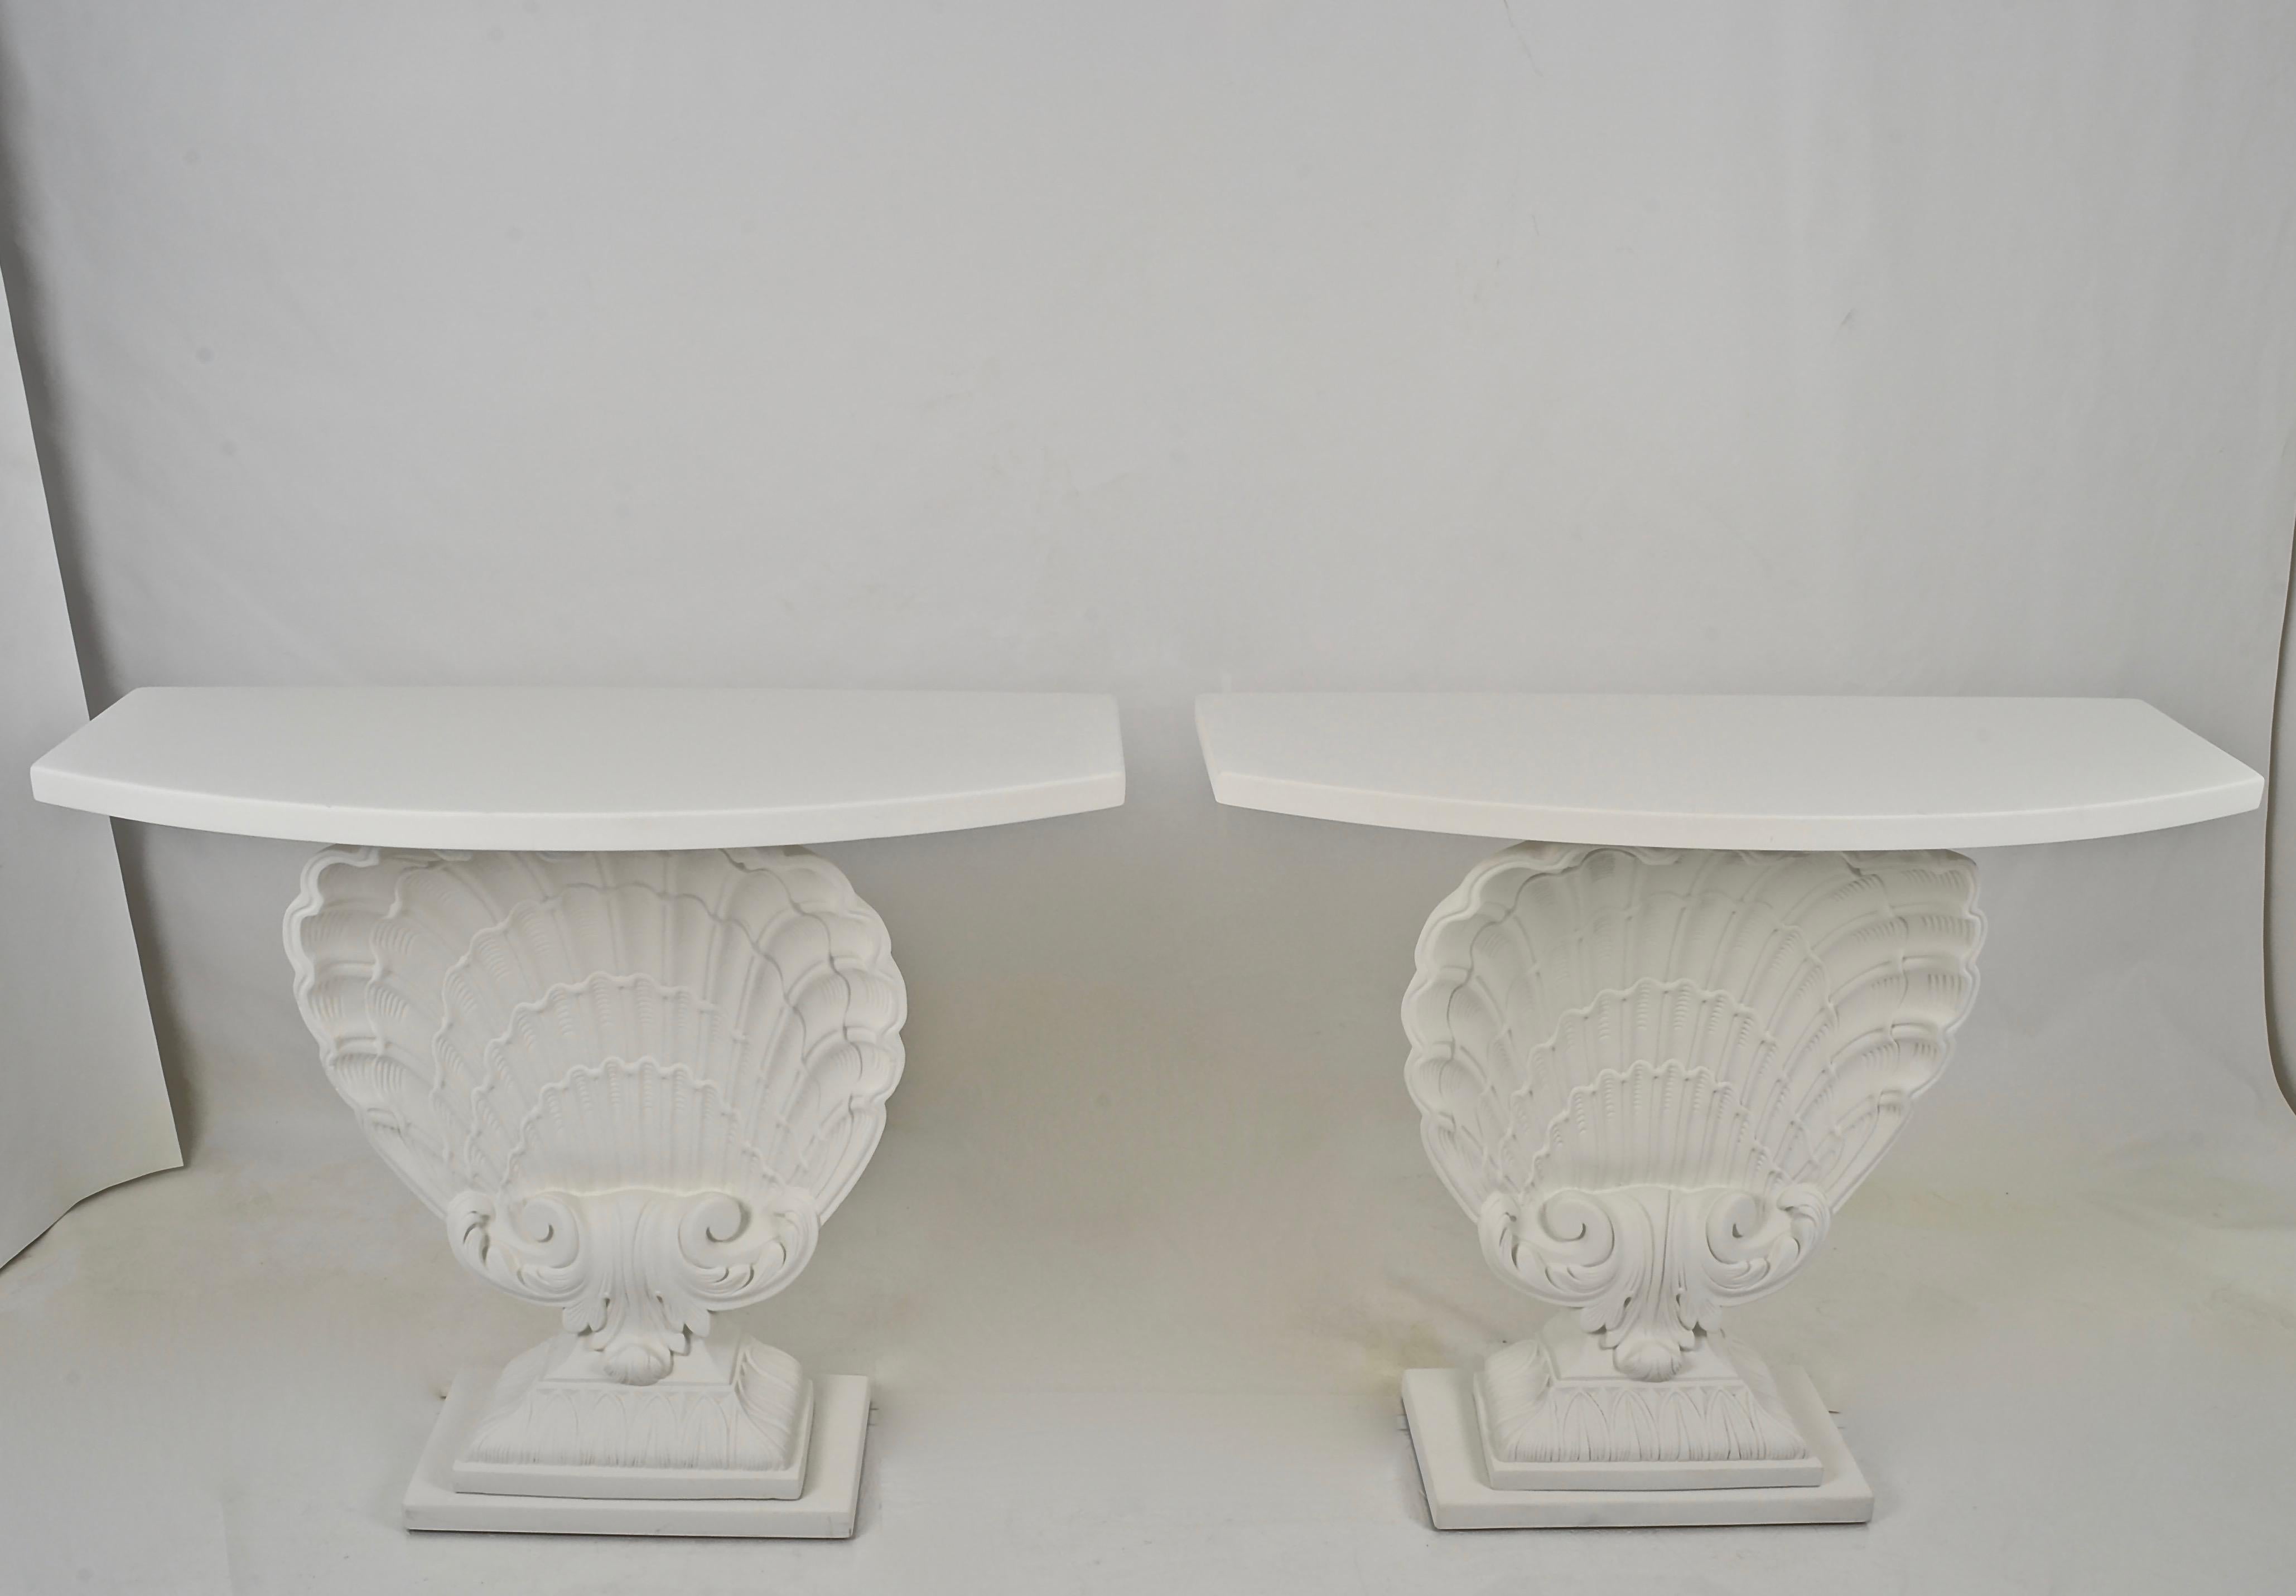 A beautifully restored pair of classic Hollywood Regency shell-form consoles by Grosfeld House. Newly painted in plaster white with a super flat finish. Excellent condition.